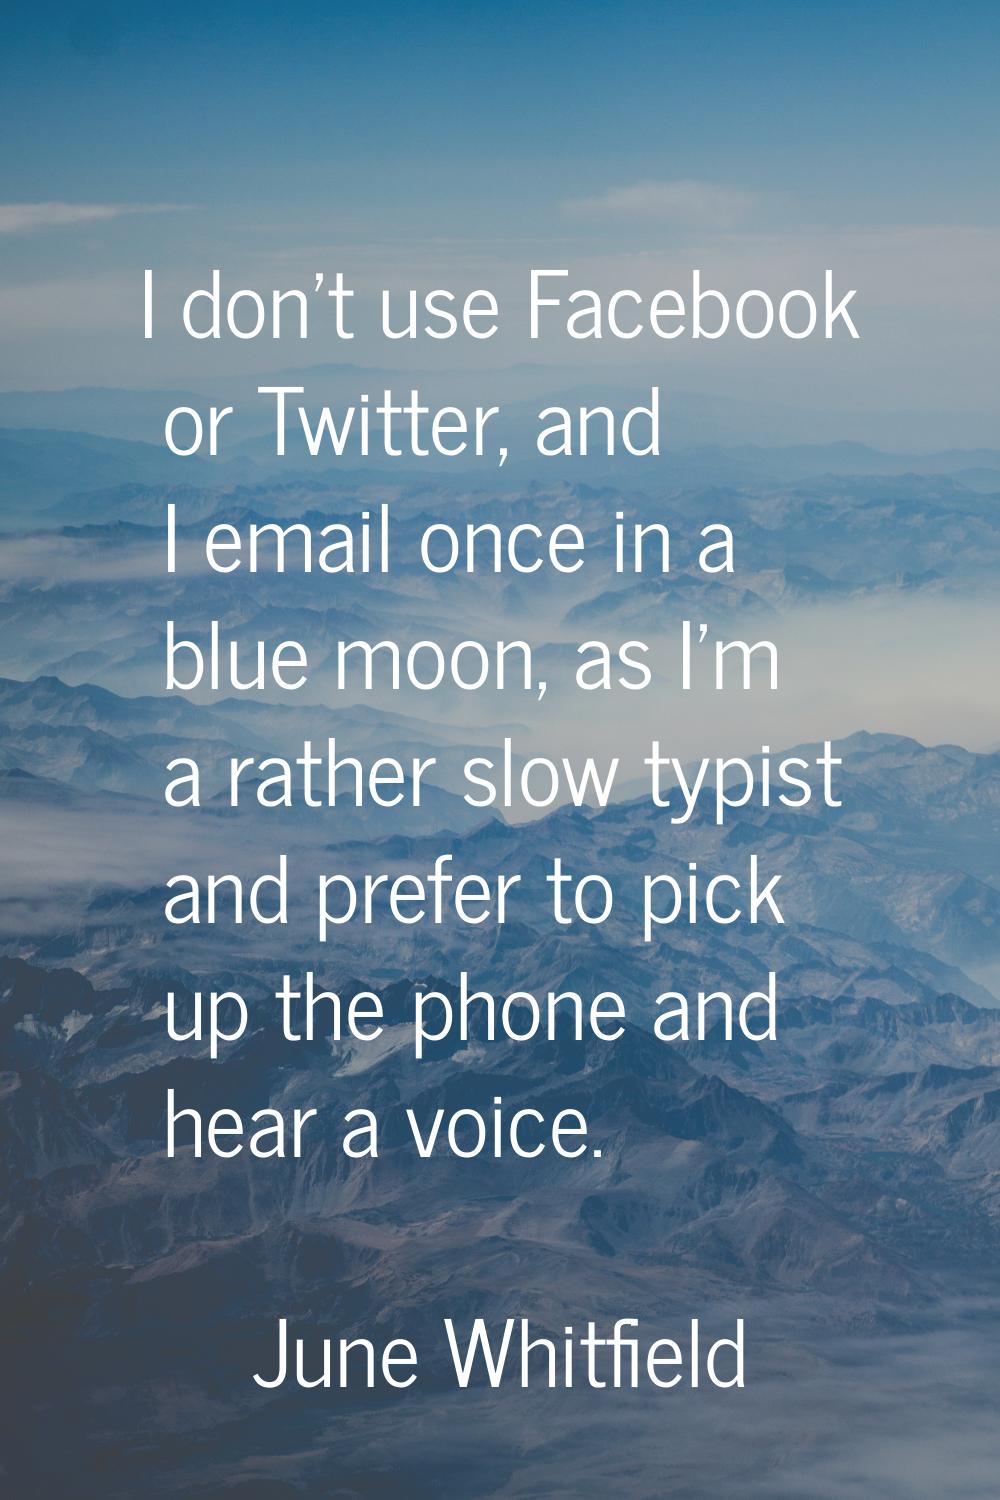 I don't use Facebook or Twitter, and I email once in a blue moon, as I'm a rather slow typist and p